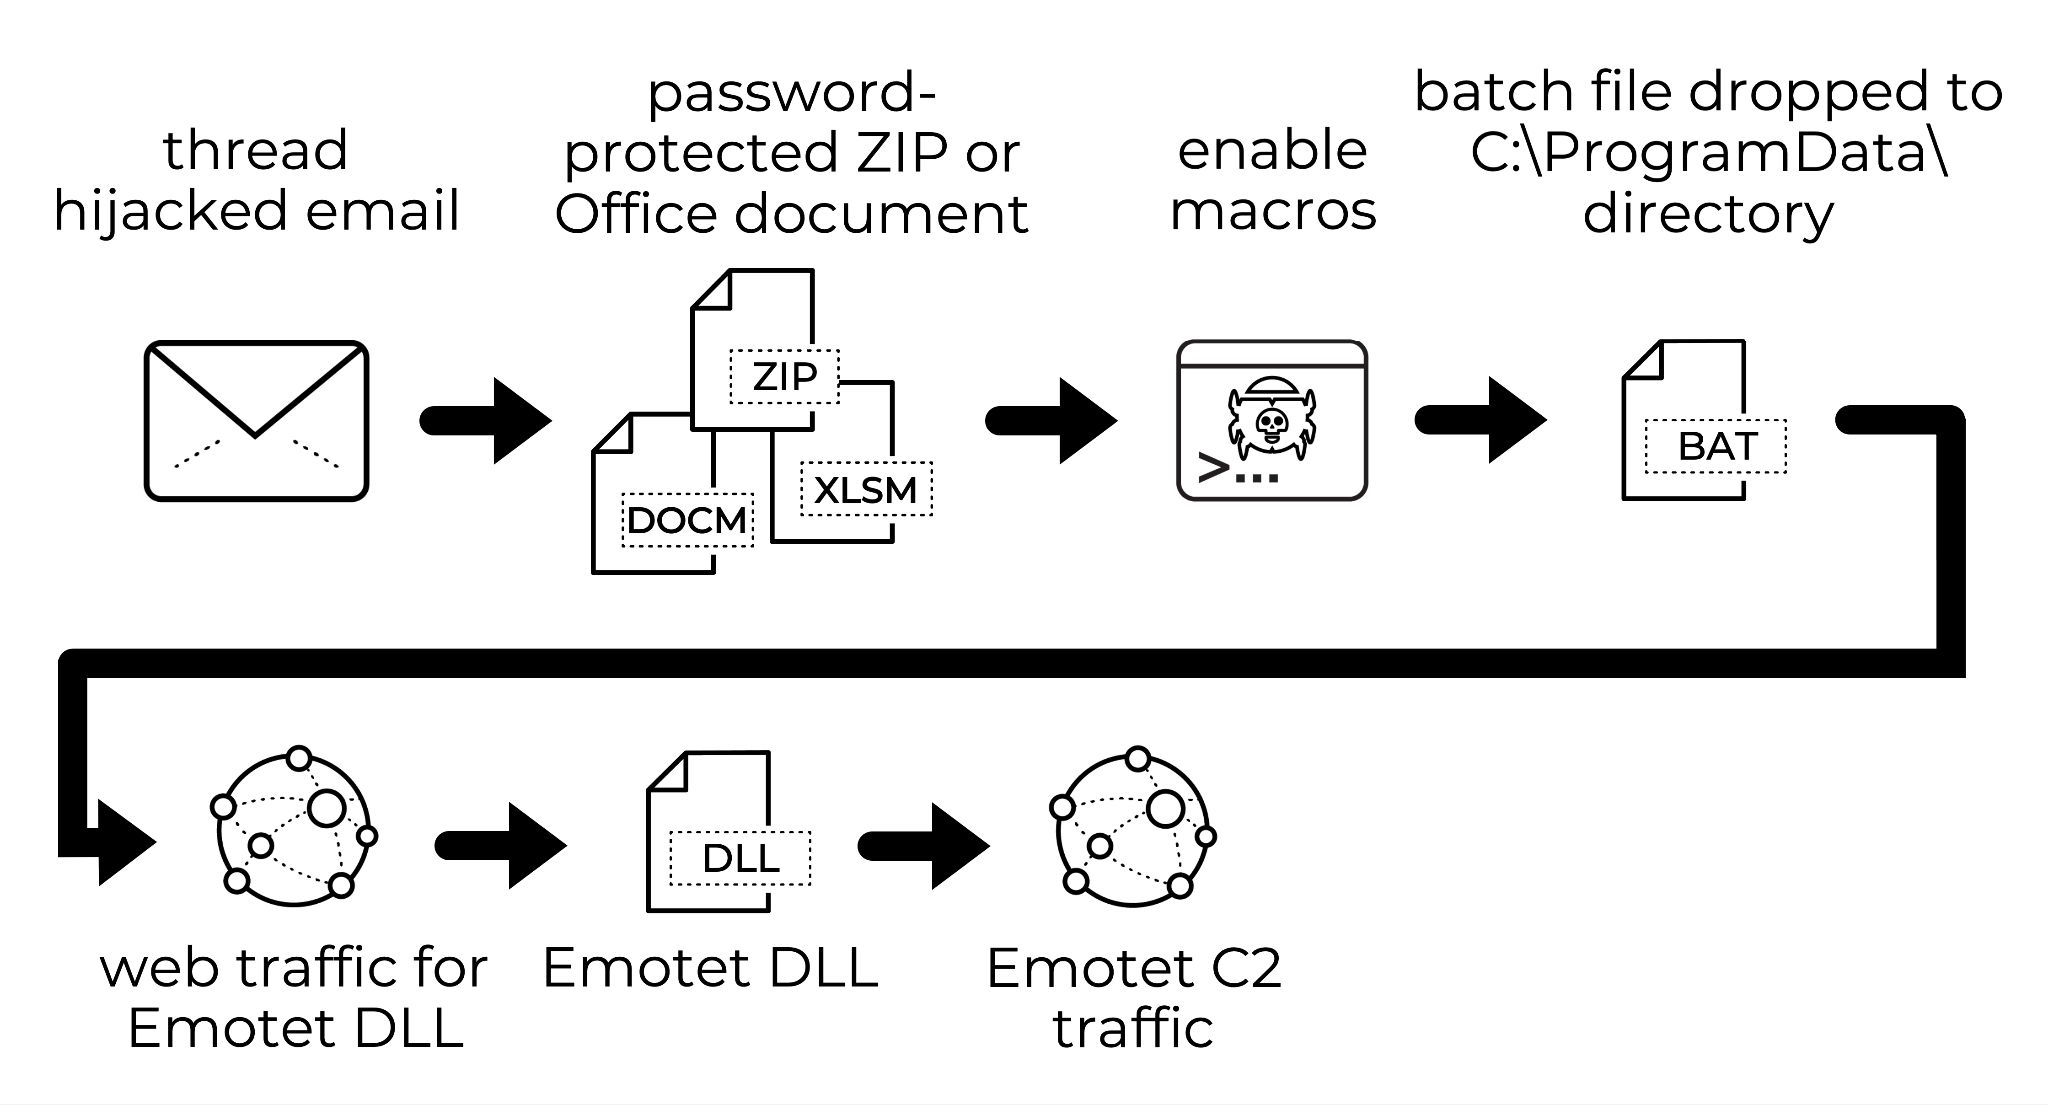 Chain of events for Emotet infections seen Monday, Nov. 23, 2021: threat hijacked email > password-protected ZIP or Office document > enable macros > batch file dropped to C:\ProgramData\directory > web traffic for Emotet DLL > Emotet DLL > Emotet C2 traffic